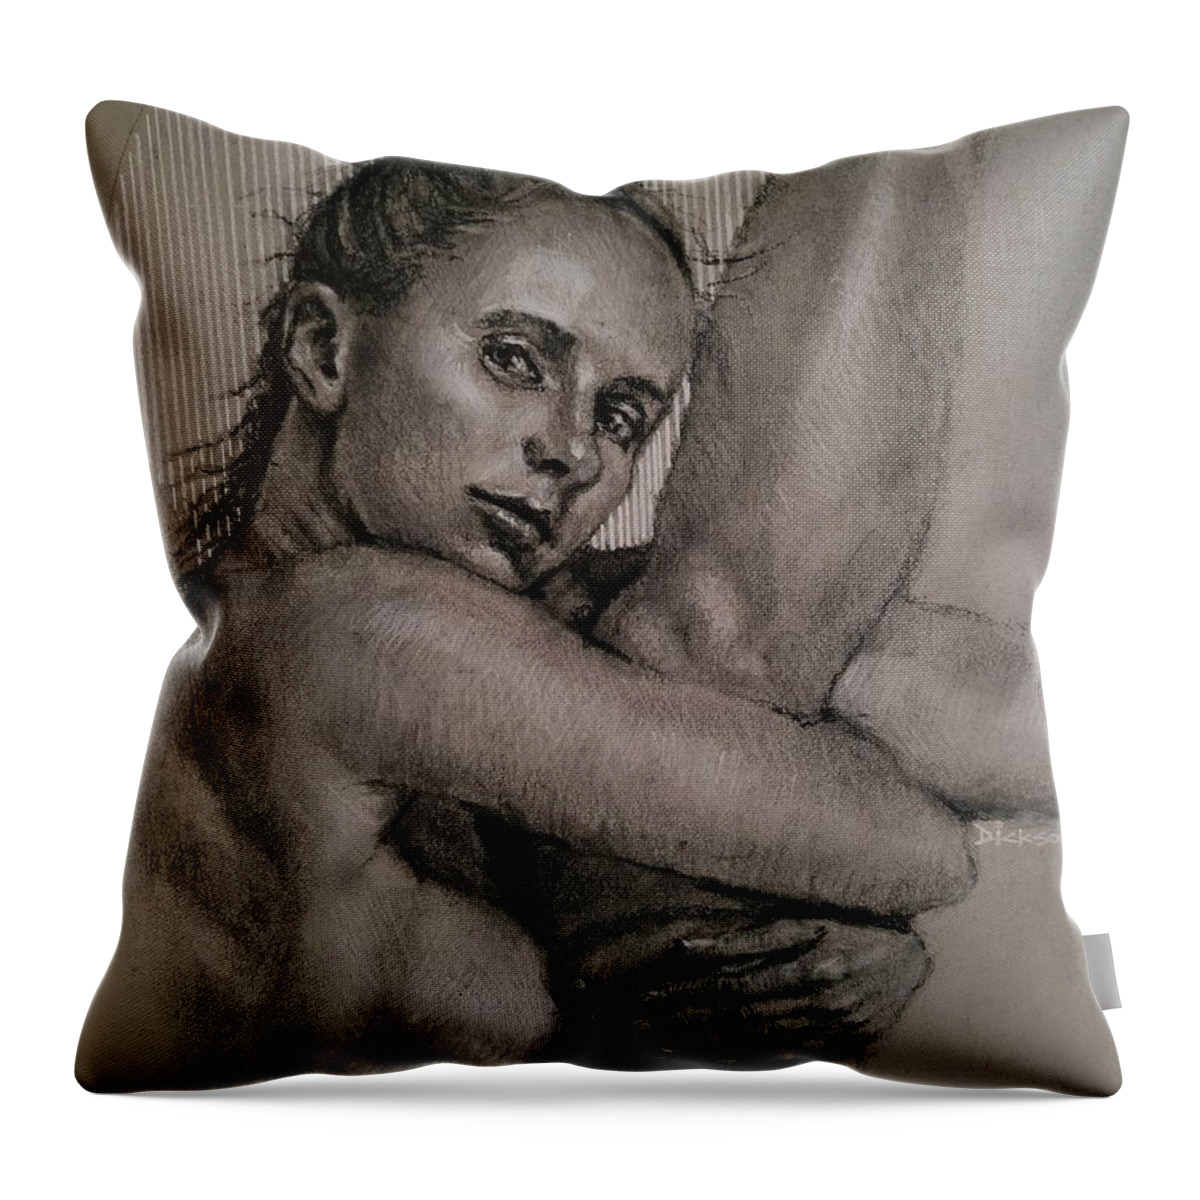  Throw Pillow featuring the painting Amarutta by Jeff Dickson